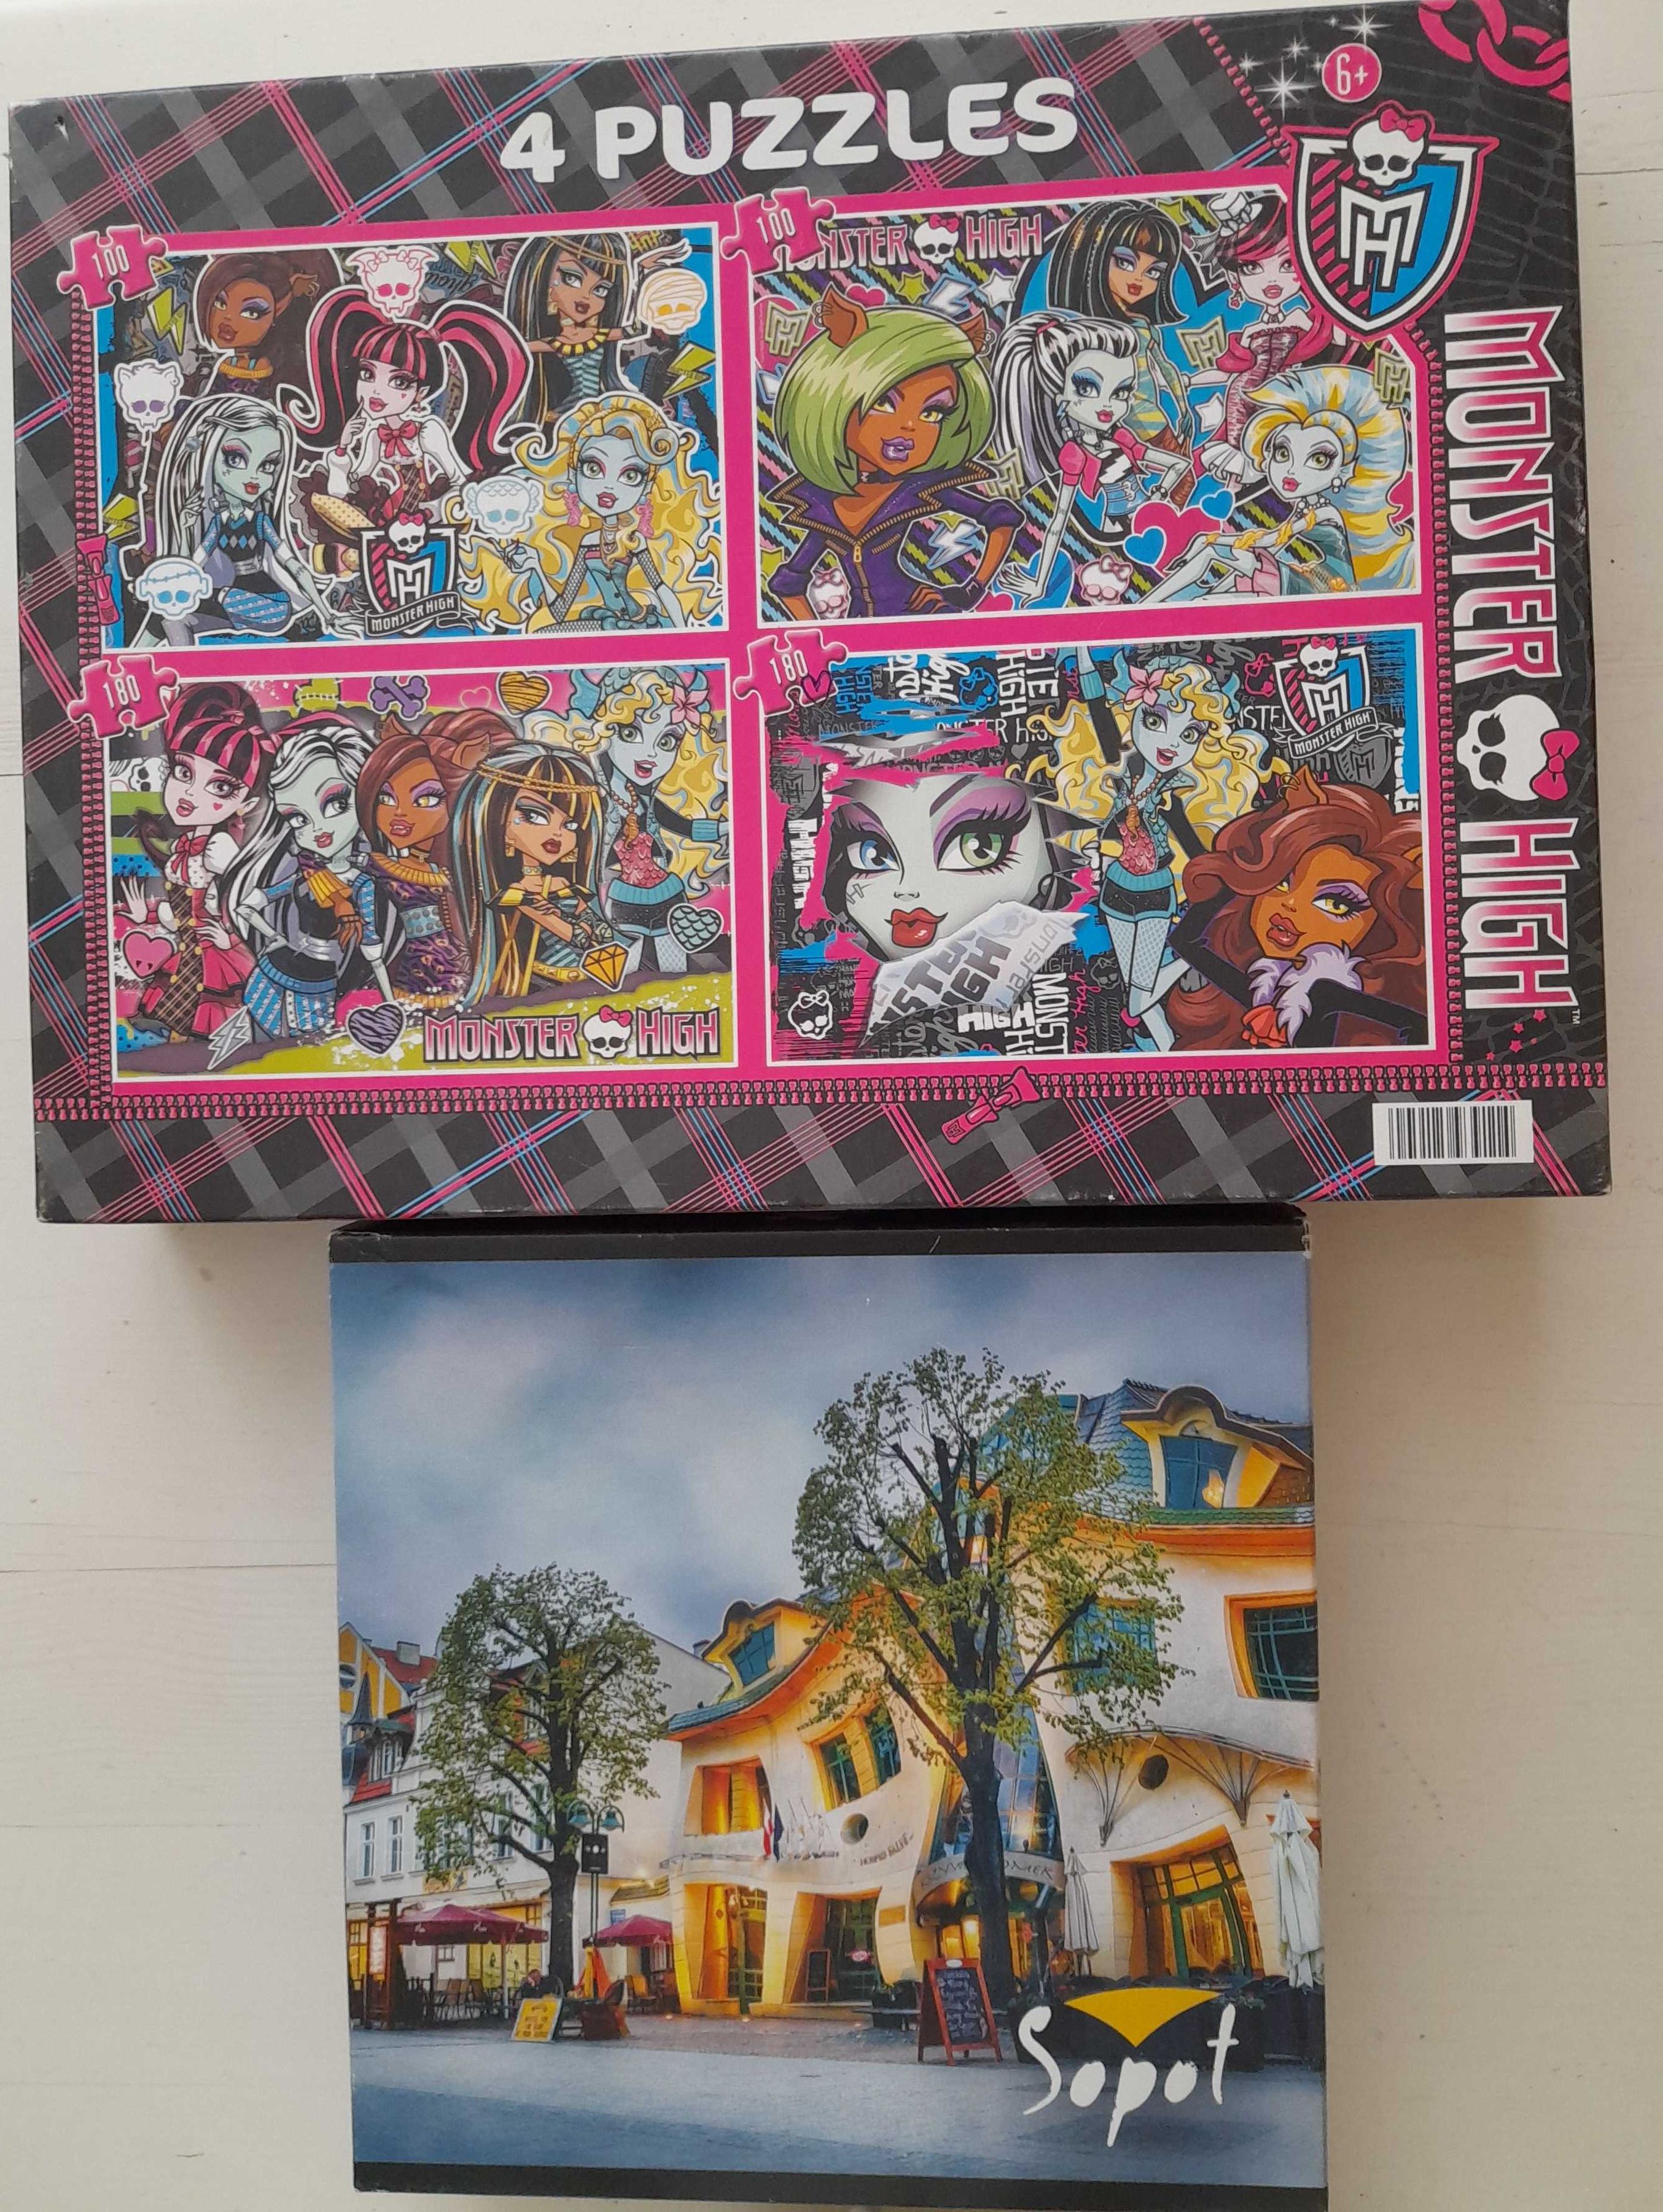 Puzzle "Monster High" i "Sopot - Krzywy Domek"